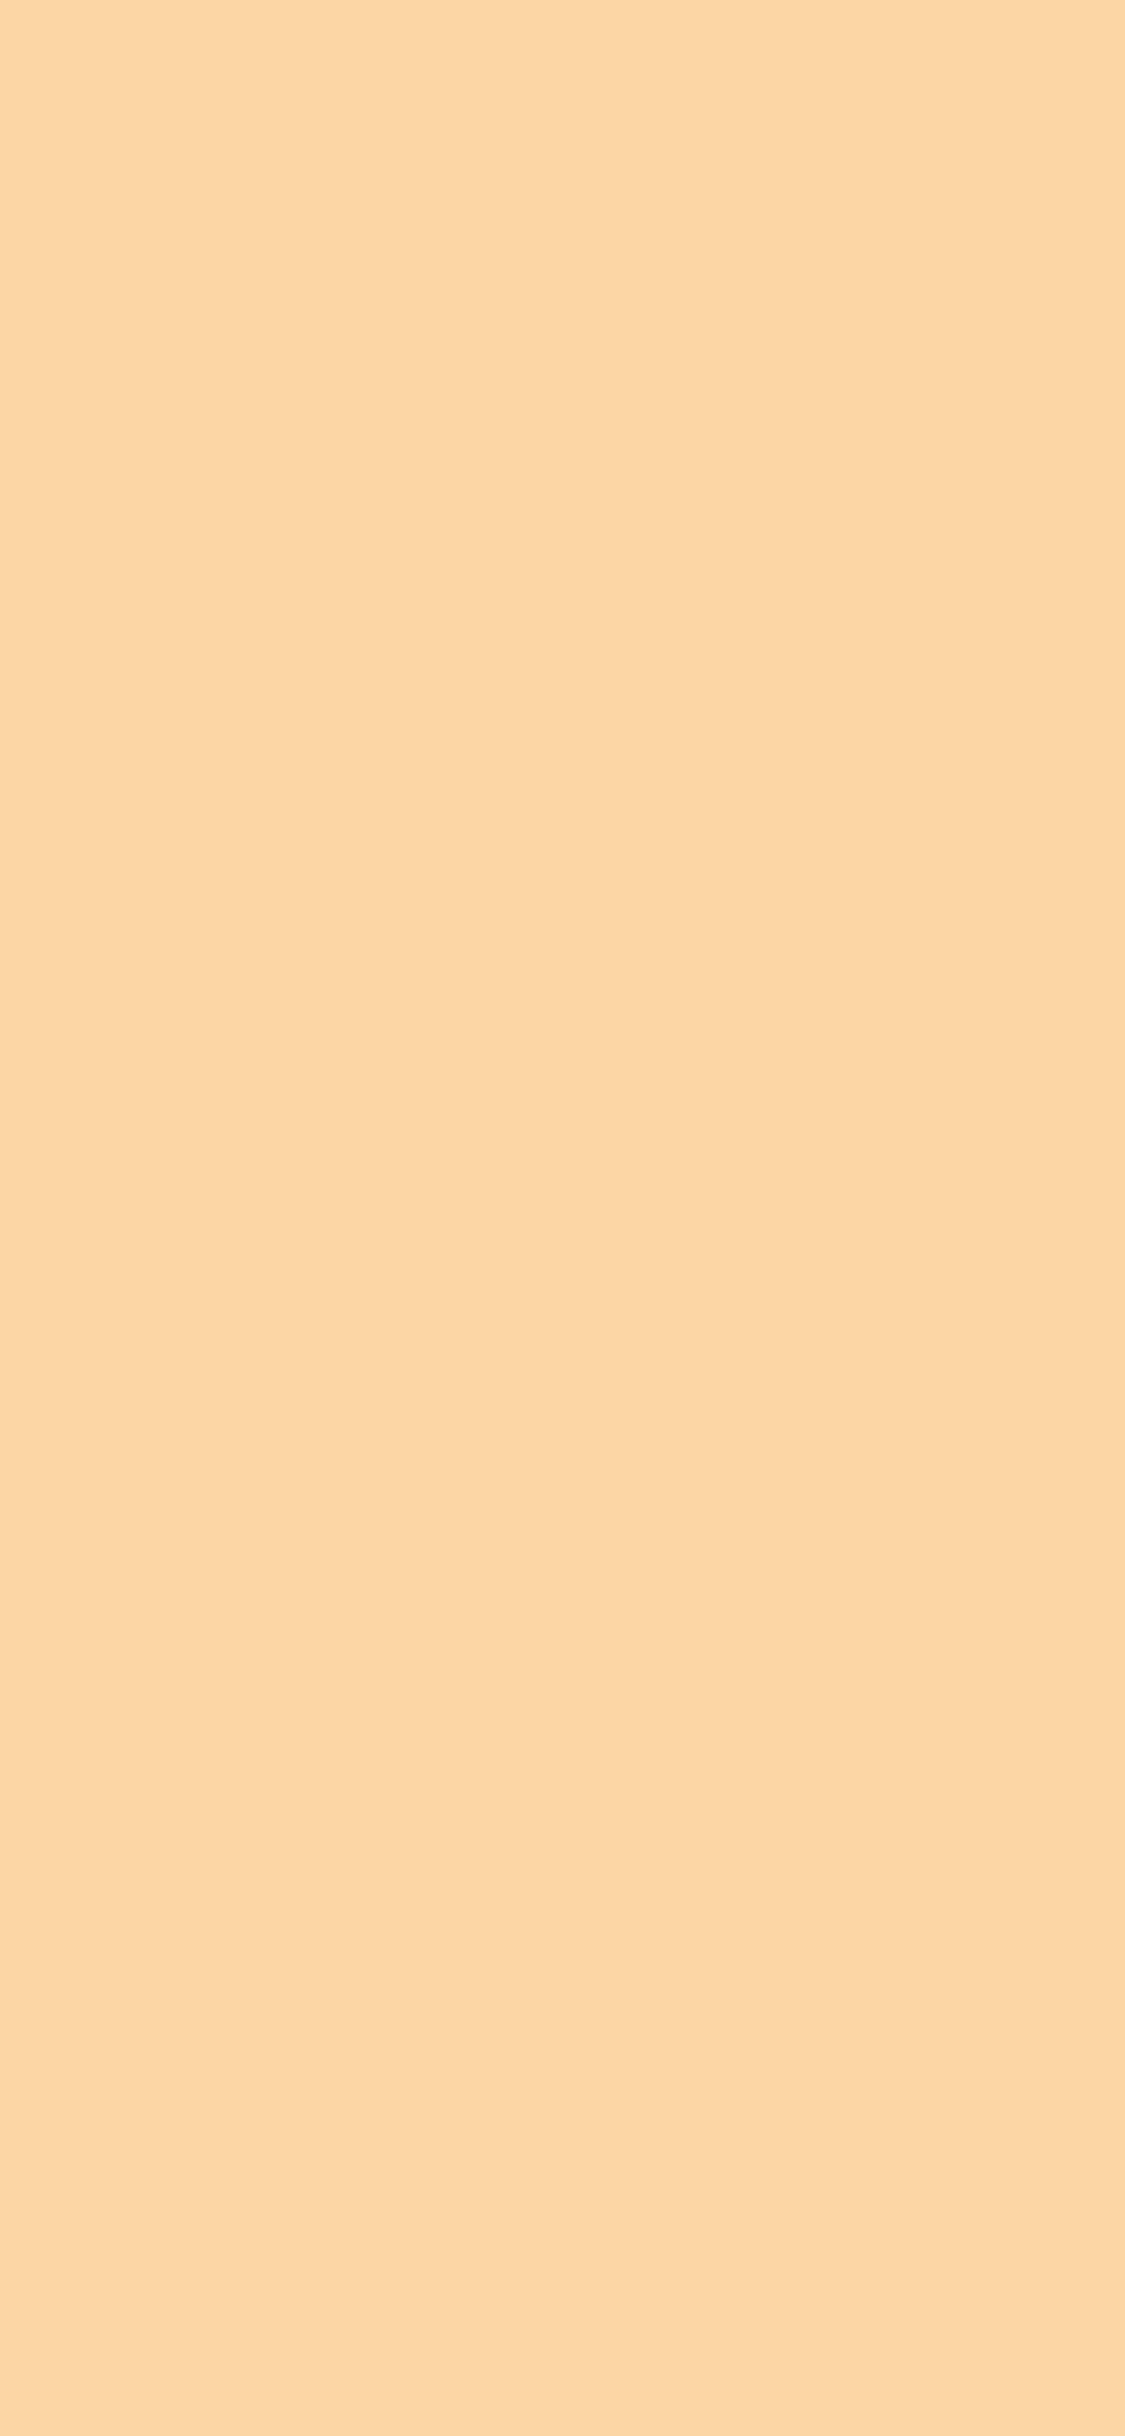 1125x2436 Sunset Solid Color Background